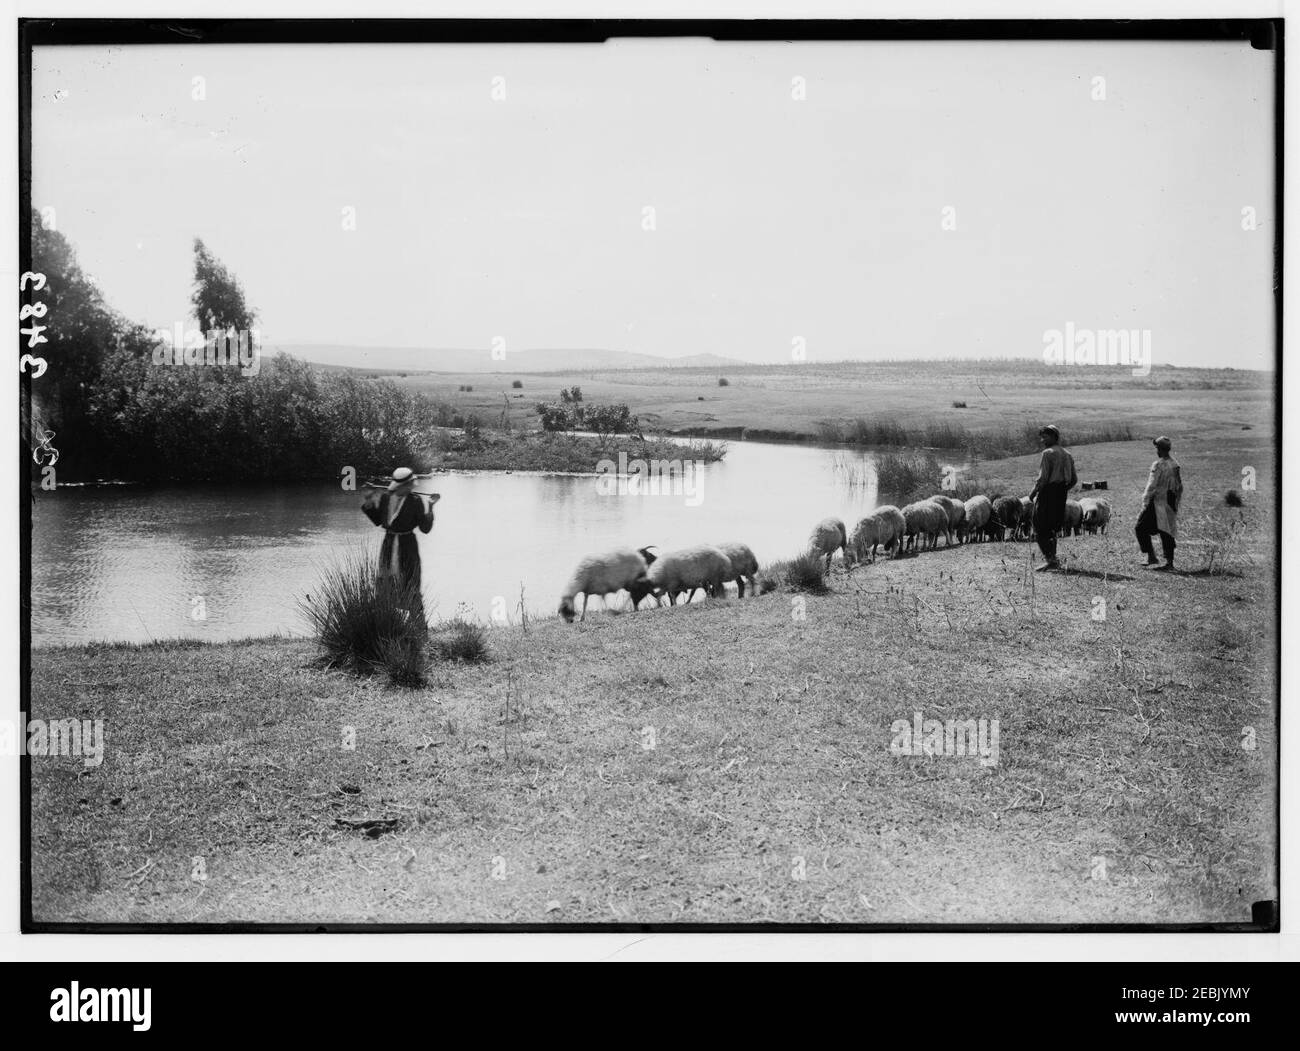 Northern views. Ras el Ain. 'Antipatris.' Source of the river Auja. Picturesque setting with sheep and shepherd Stock Photo